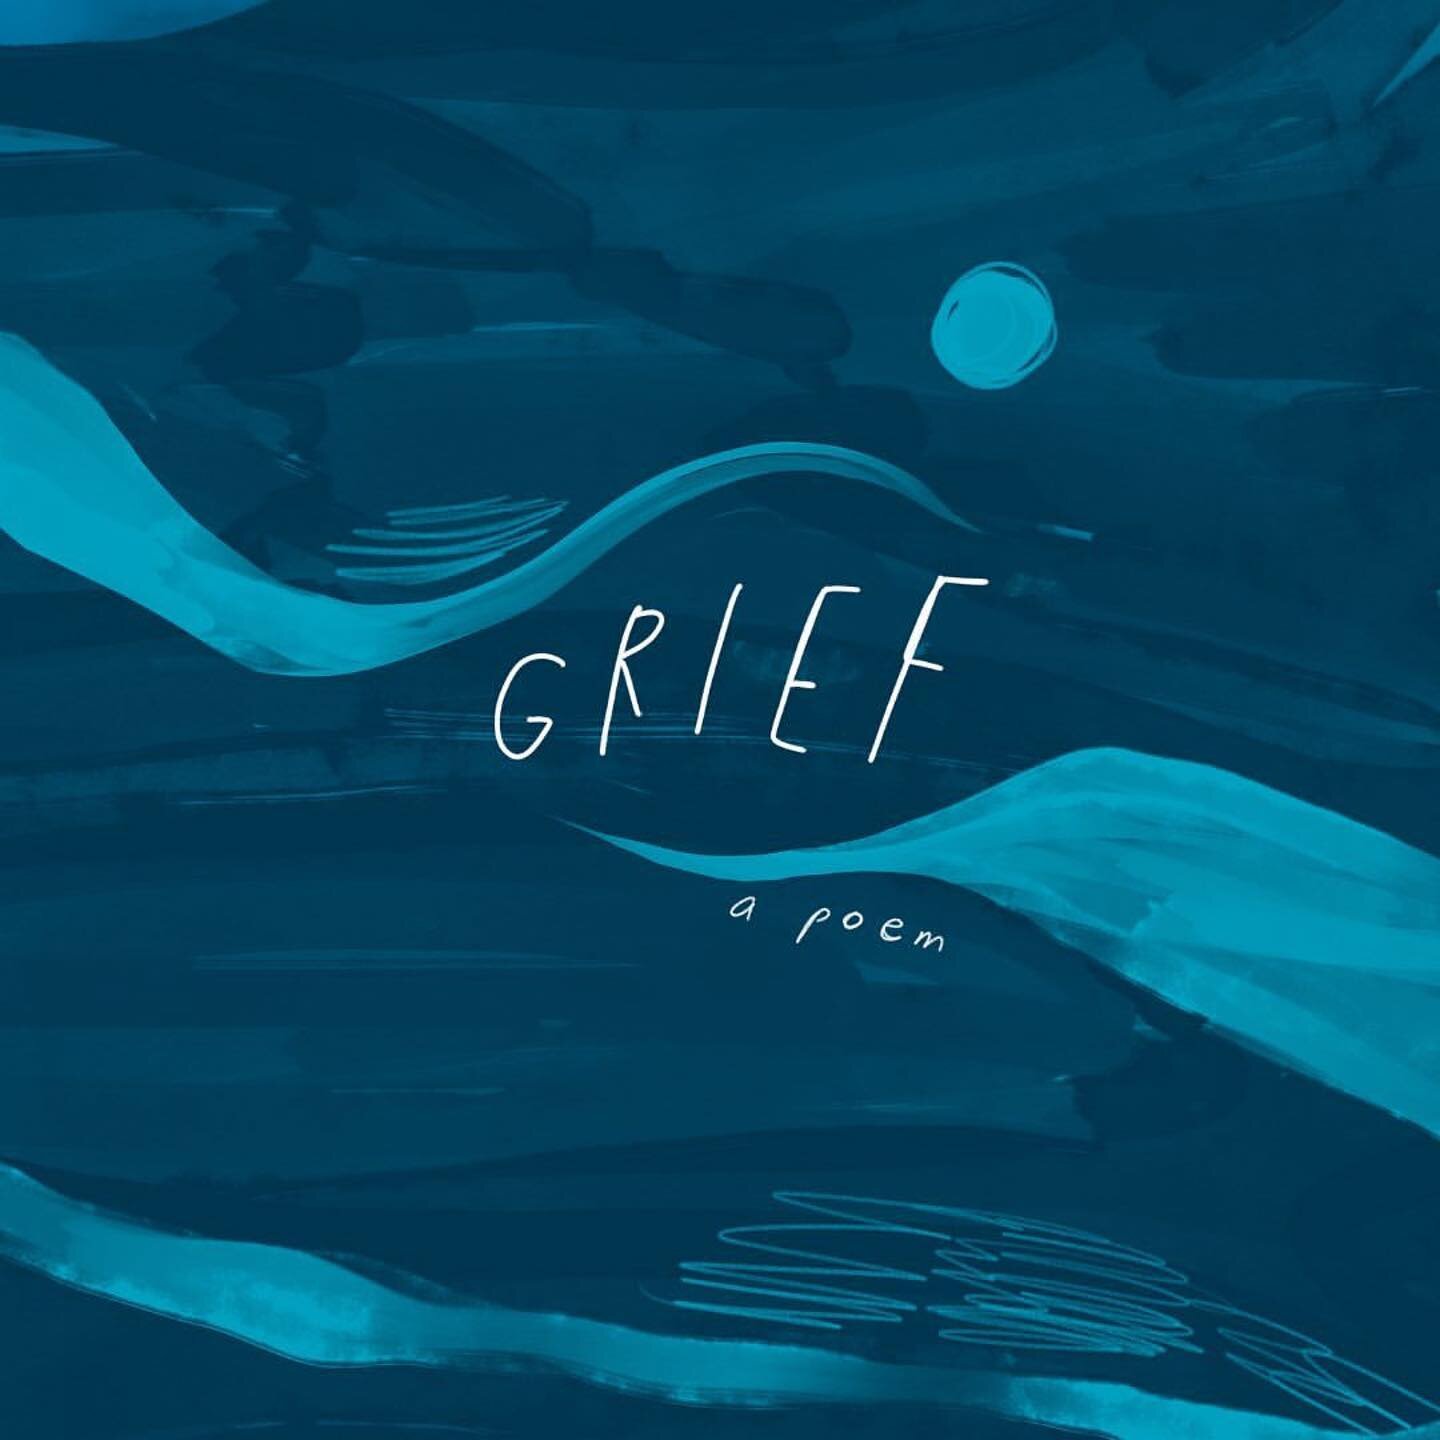 Holiday weeks can bring up a lot for those of us who are grieving a loss, a life change, or an end of a relationship.

Thank you for this reminder about grief, @morganharpernichols 💙

#Repost @morganharpernichols
・・・
For the one who is grieving:

Gr